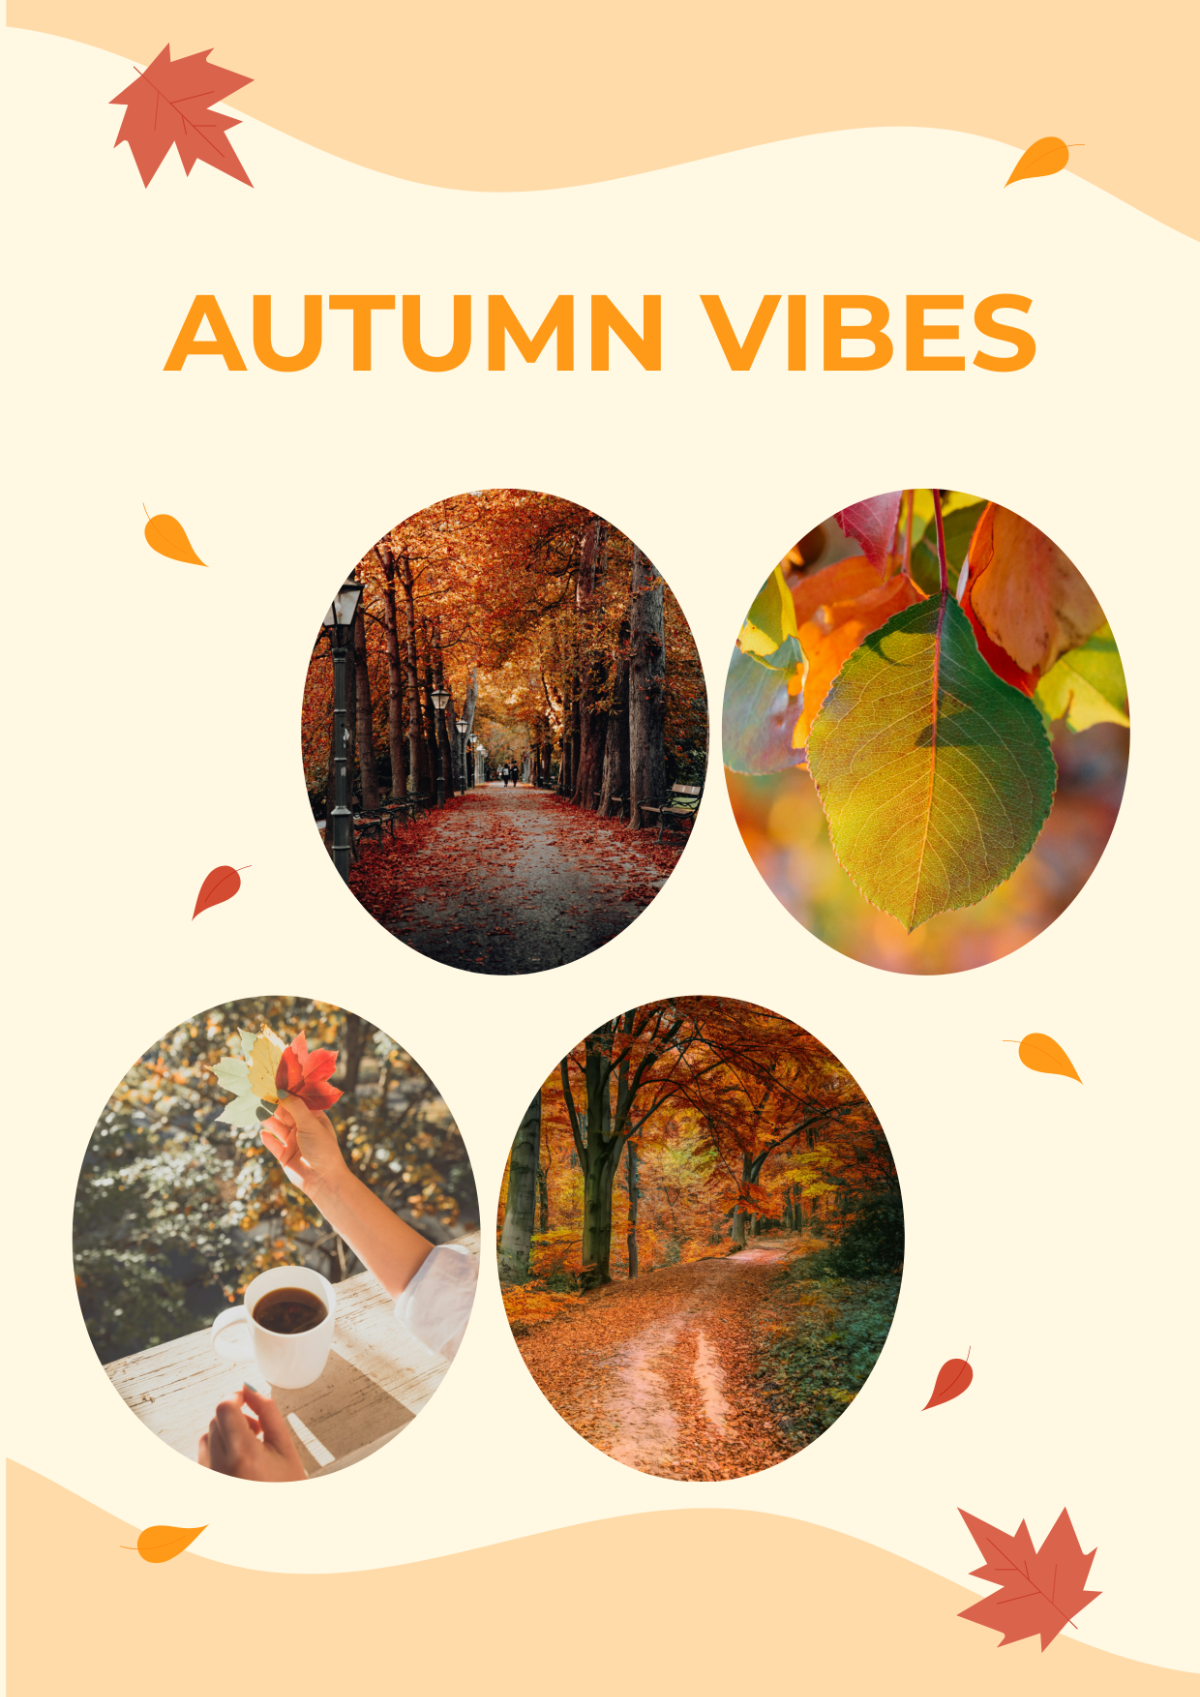 Autumn Vibe Inspiration Photo Collage Template